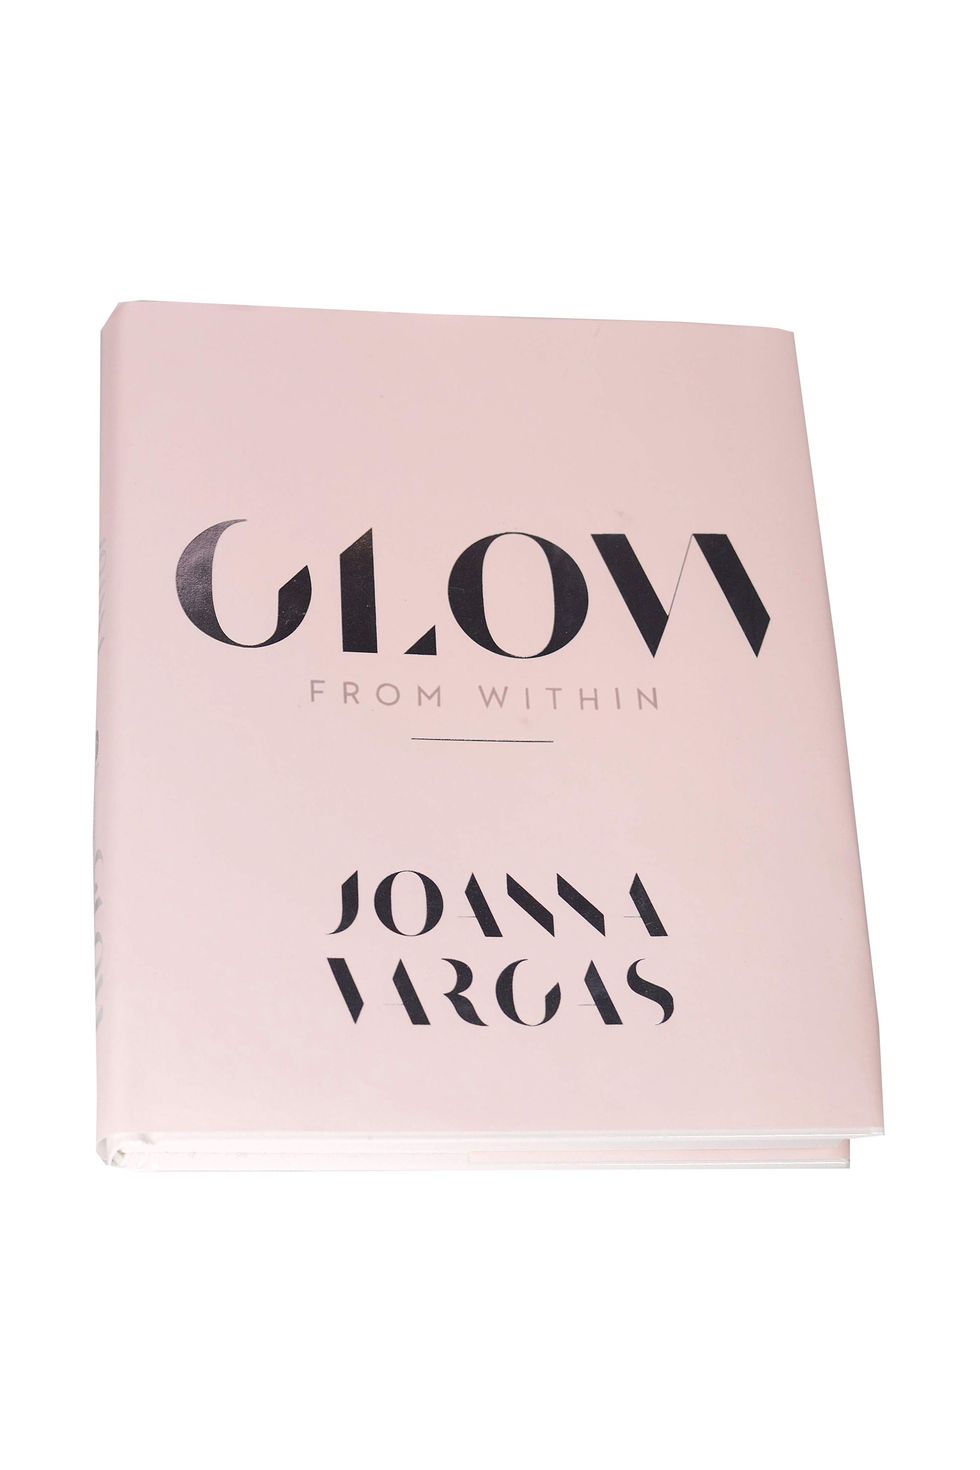 Glow from Within by Joanna Vargas